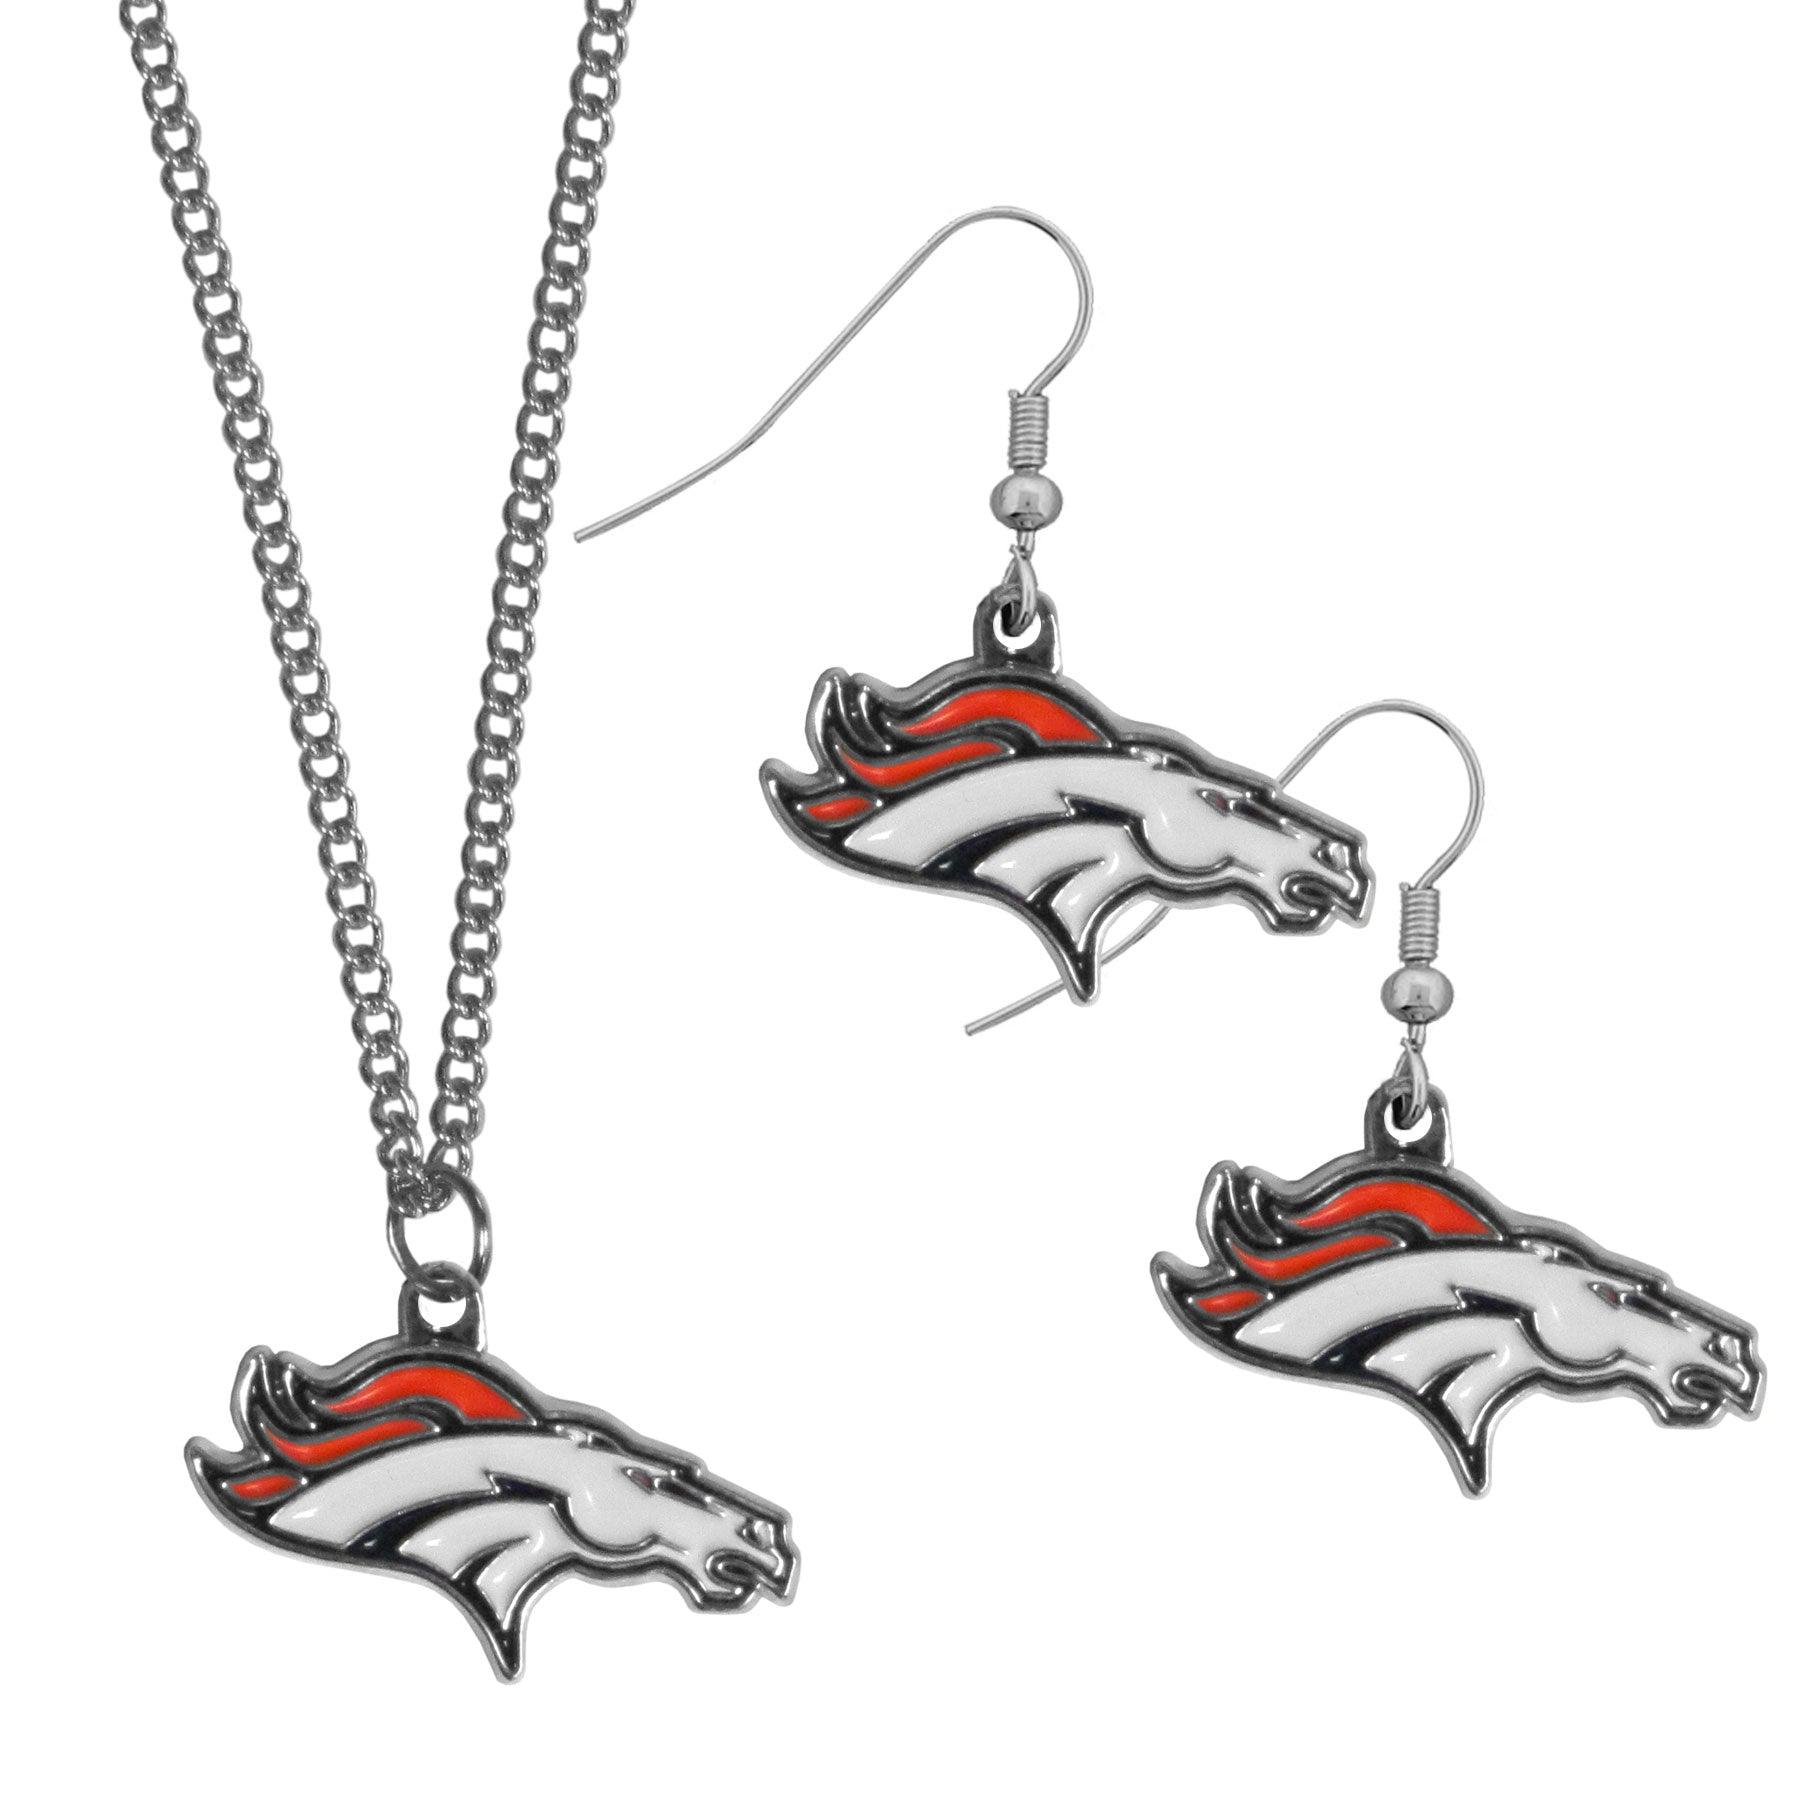 Denver Broncos Dangle Earrings and Chain Necklace Set